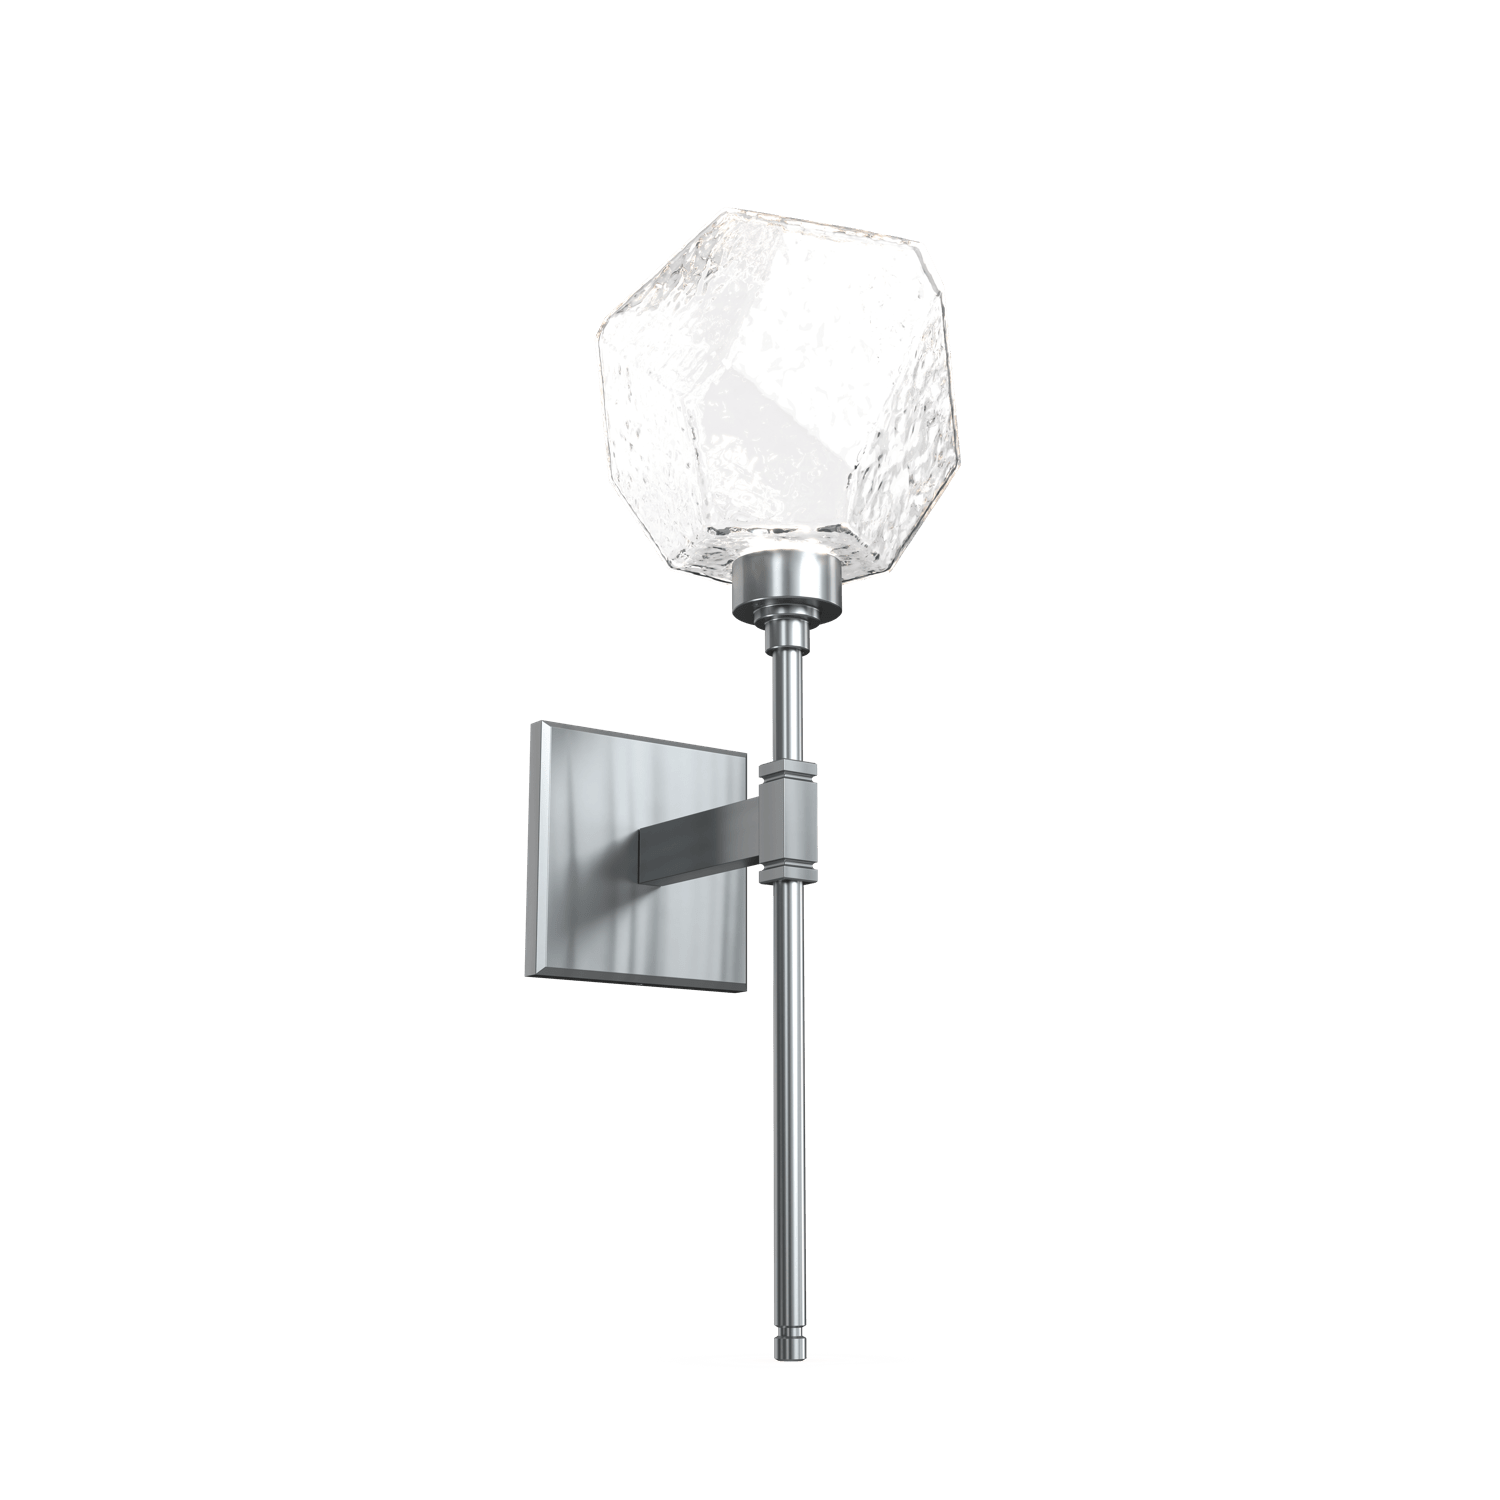 IDB0039-08-SN-C-Hammerton-Studio-Gem-belvedere-wall-sconce-with-satin-nickel-finish-and-clear-blown-glass-shades-and-LED-lamping